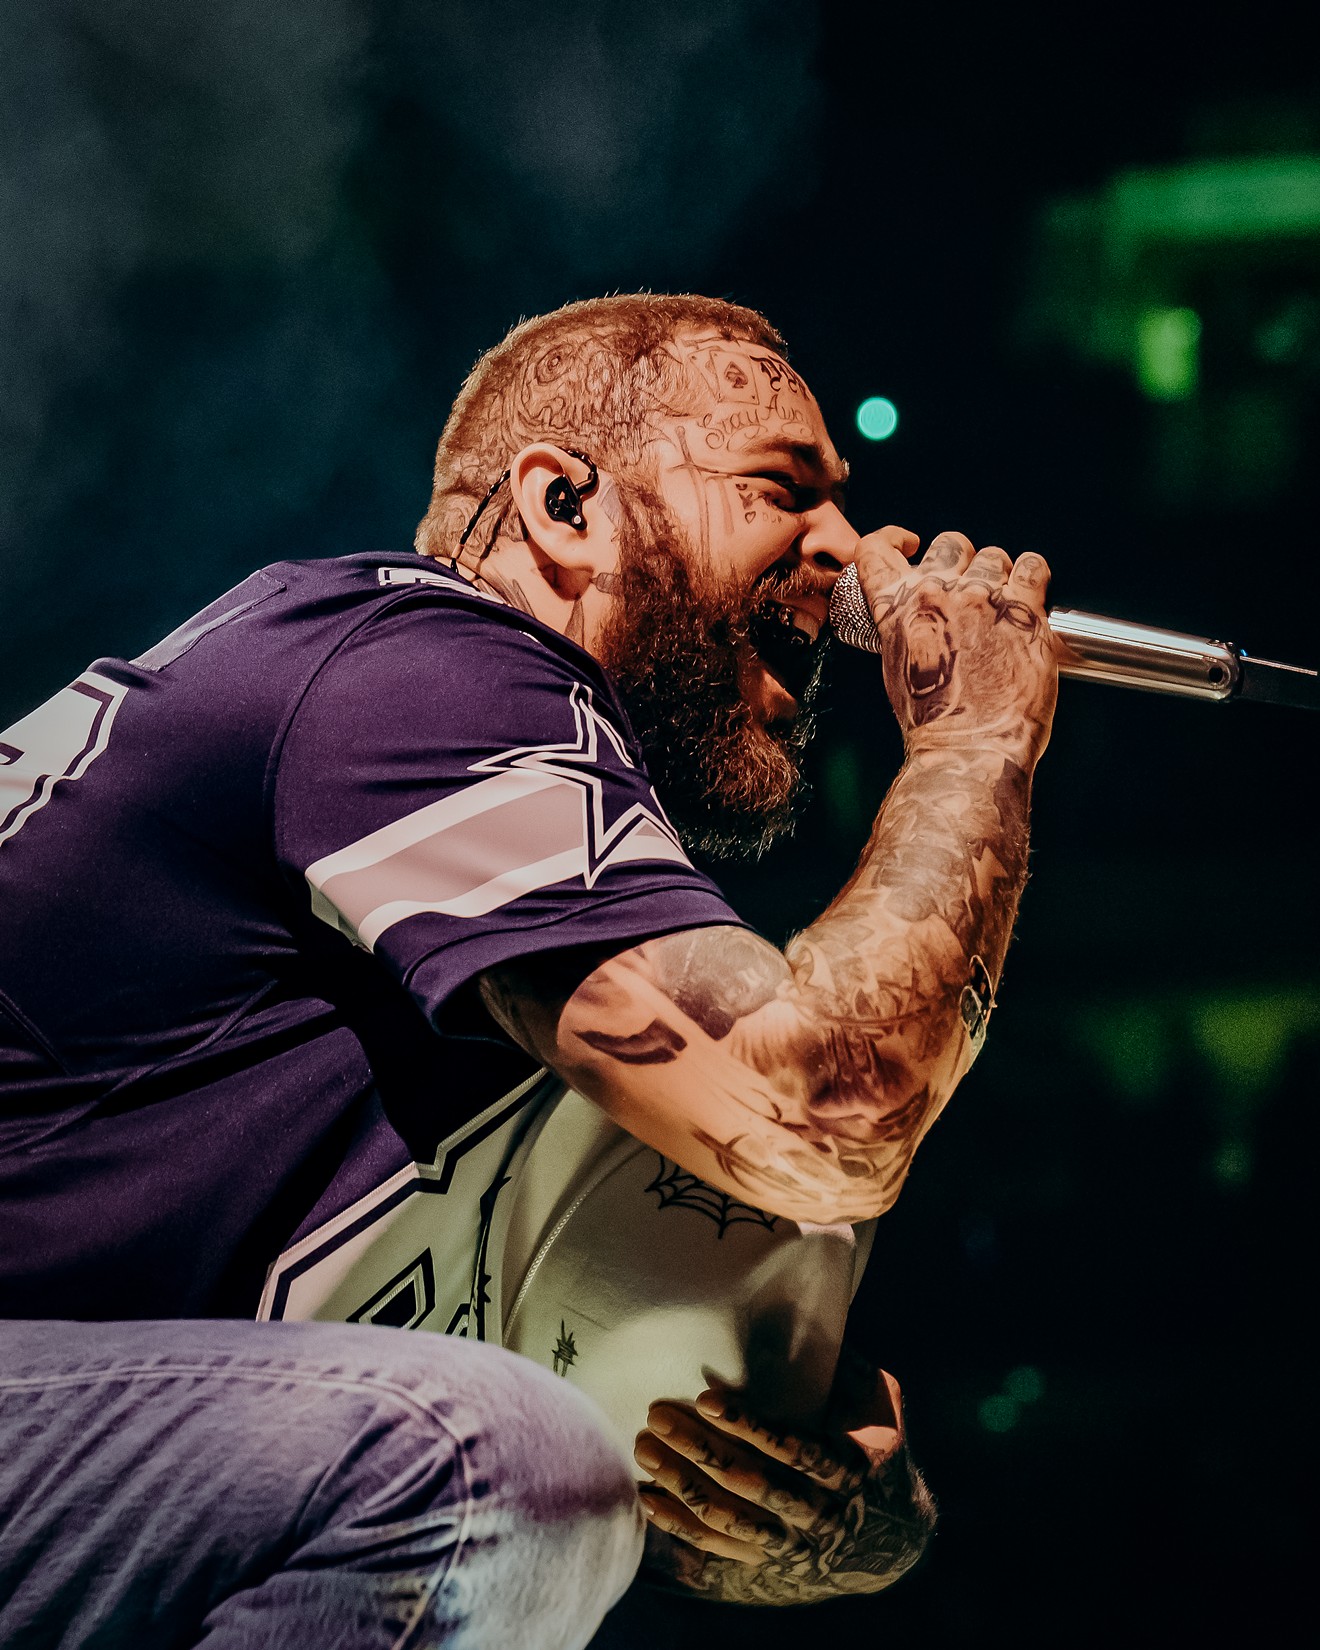 Posty dropped some gems and F-bombs at his Friday night show in Dallas.